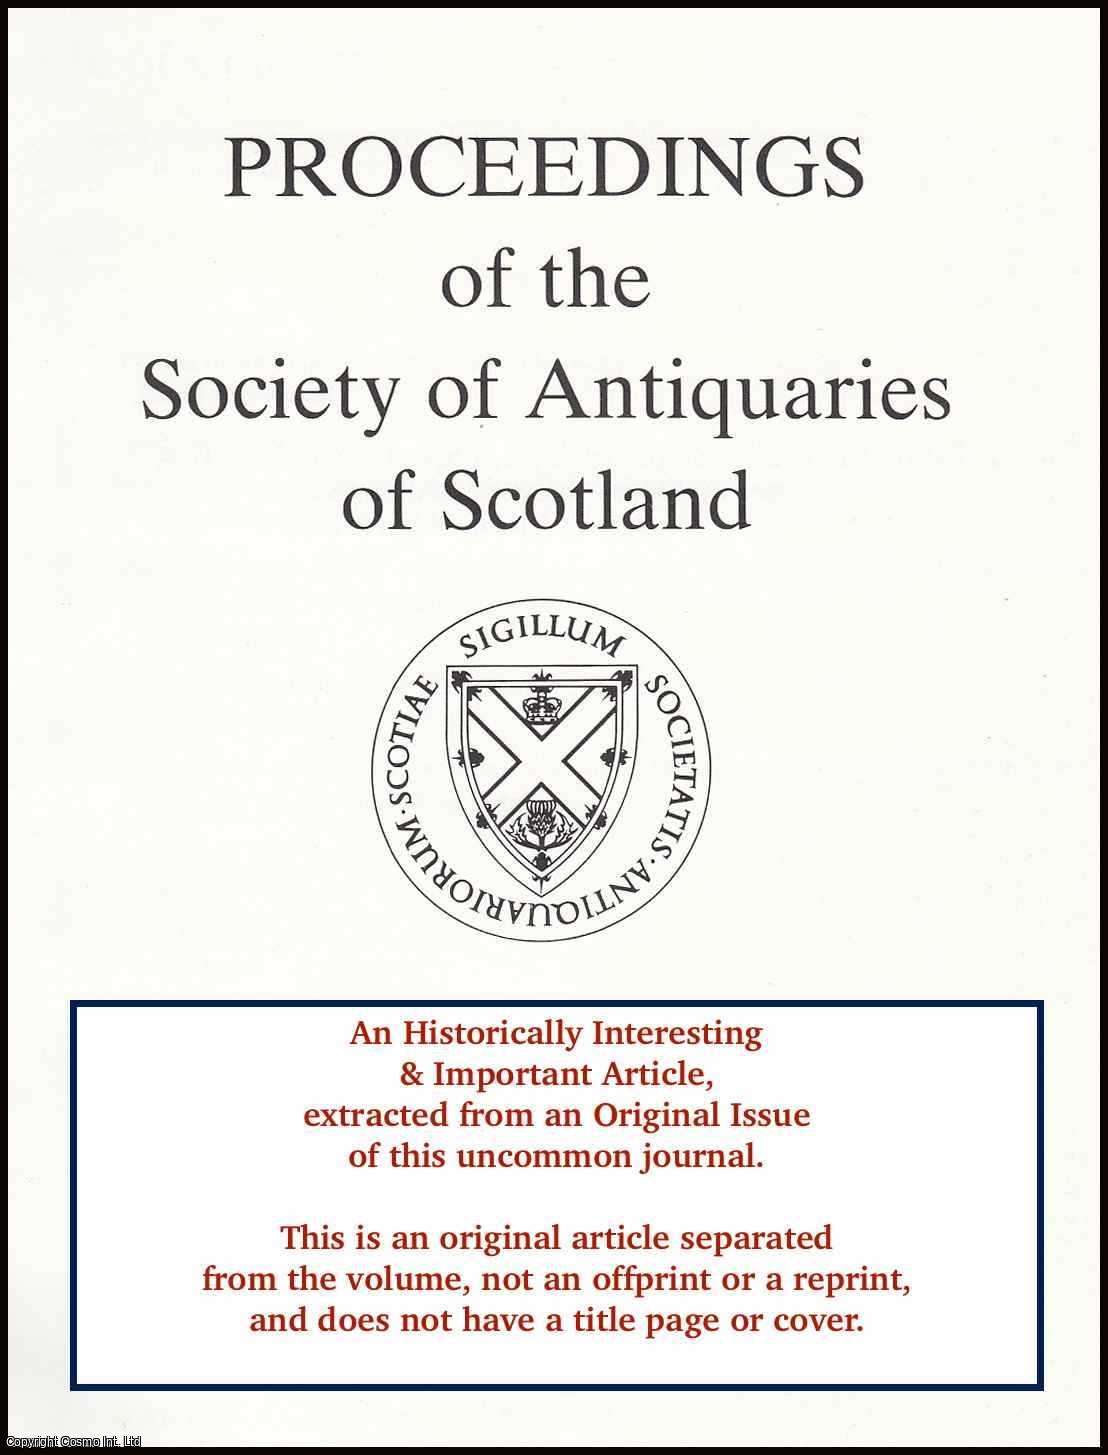 J.A. Graham-Campbell - Two Scandinavian Brooch-Fragments of Viking-Age Date from The Outer Hebrides. An original article from the Proceedings of the Society of Antiquaries of Scotland, 1975.